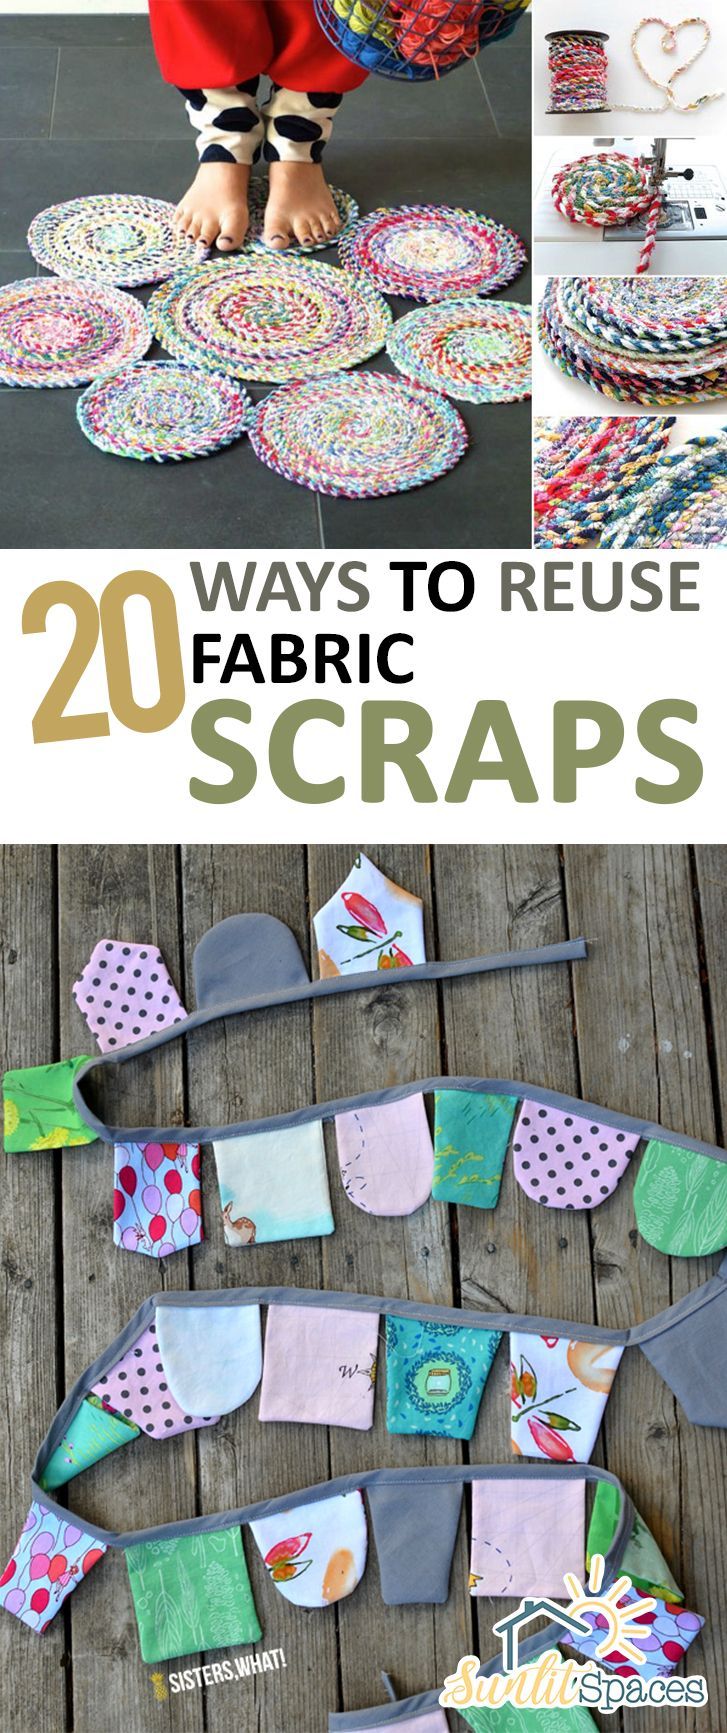 20 Ways to Reuse Fabric Scraps - Sunlit Spaces | DIY Home Decor, Holiday, and More - 20 Ways to Reuse Fabric Scraps - Sunlit Spaces | DIY Home Decor, Holiday, and More -   19 fabric crafts to sell ideas